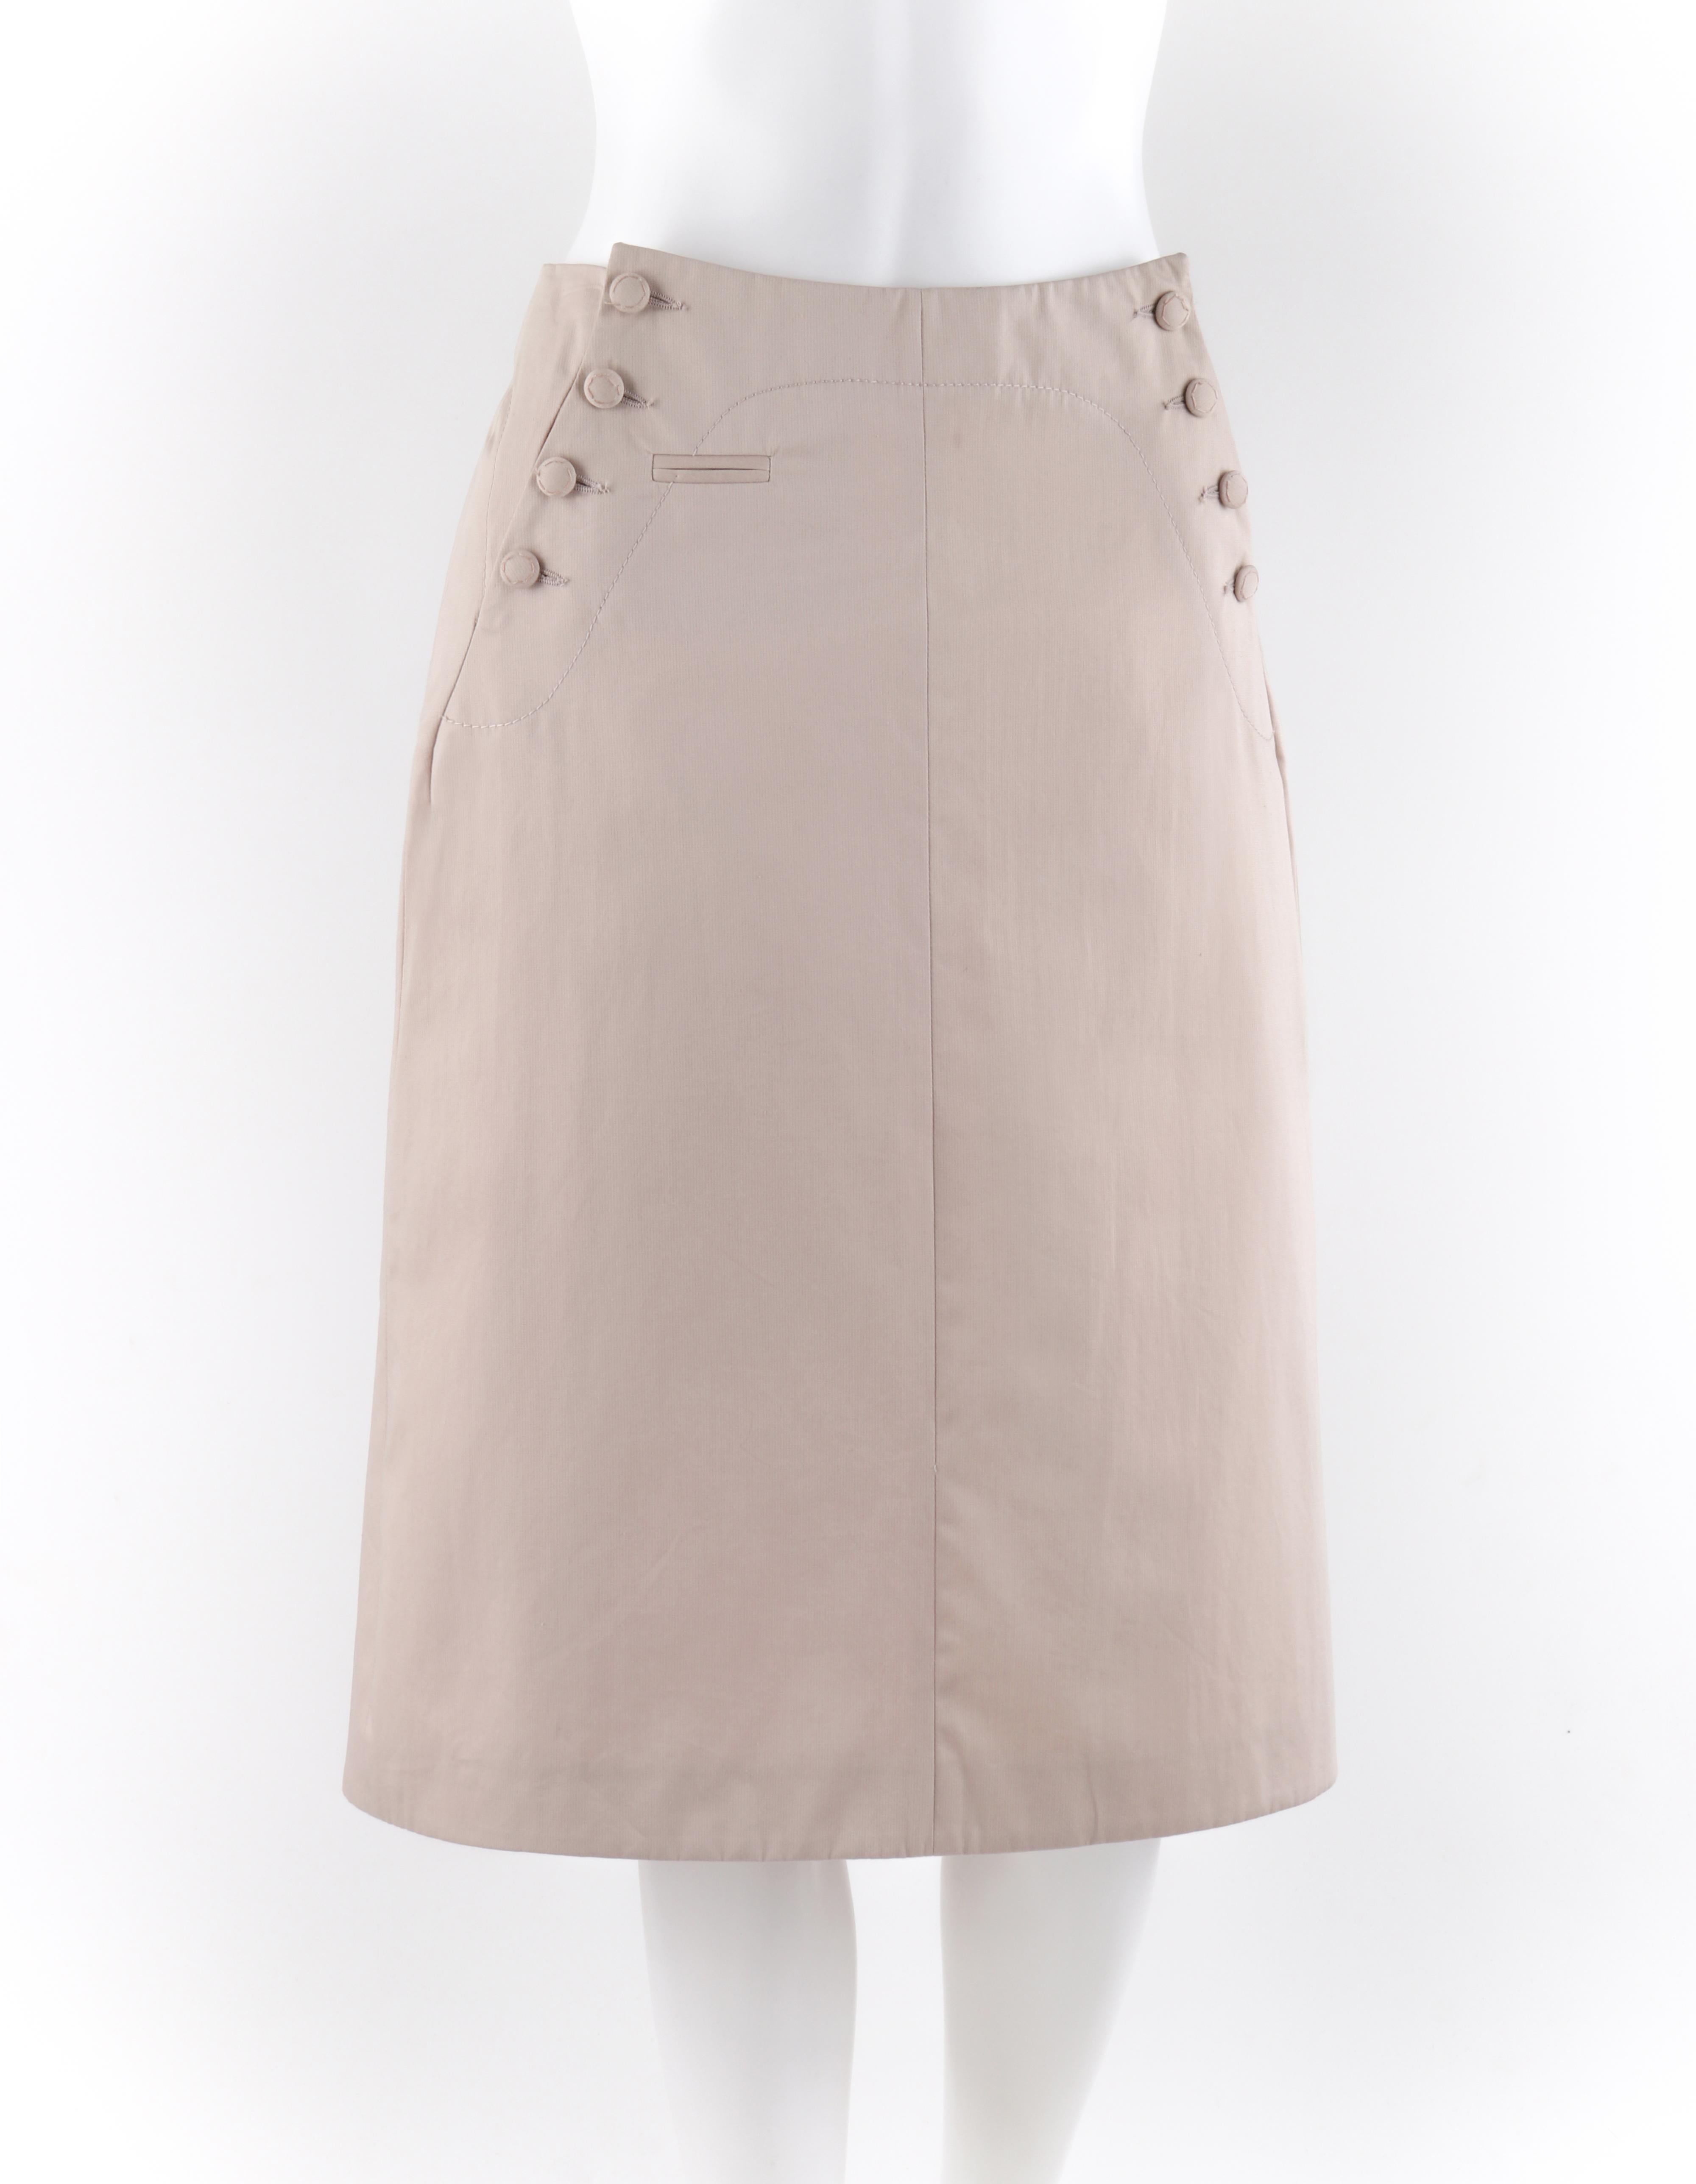 ALEXANDER McQUEEN S/S 2007 “Saraband” Blush High Rise Double Button Front Skirt

Brand / Manufacturer: Alexander McQueen
Collection: S/S 2007 “Saraband”
Designer: Alexander McQueen
Style: Tailored high rise skirt with kick pleat 
Color(s): Blush /